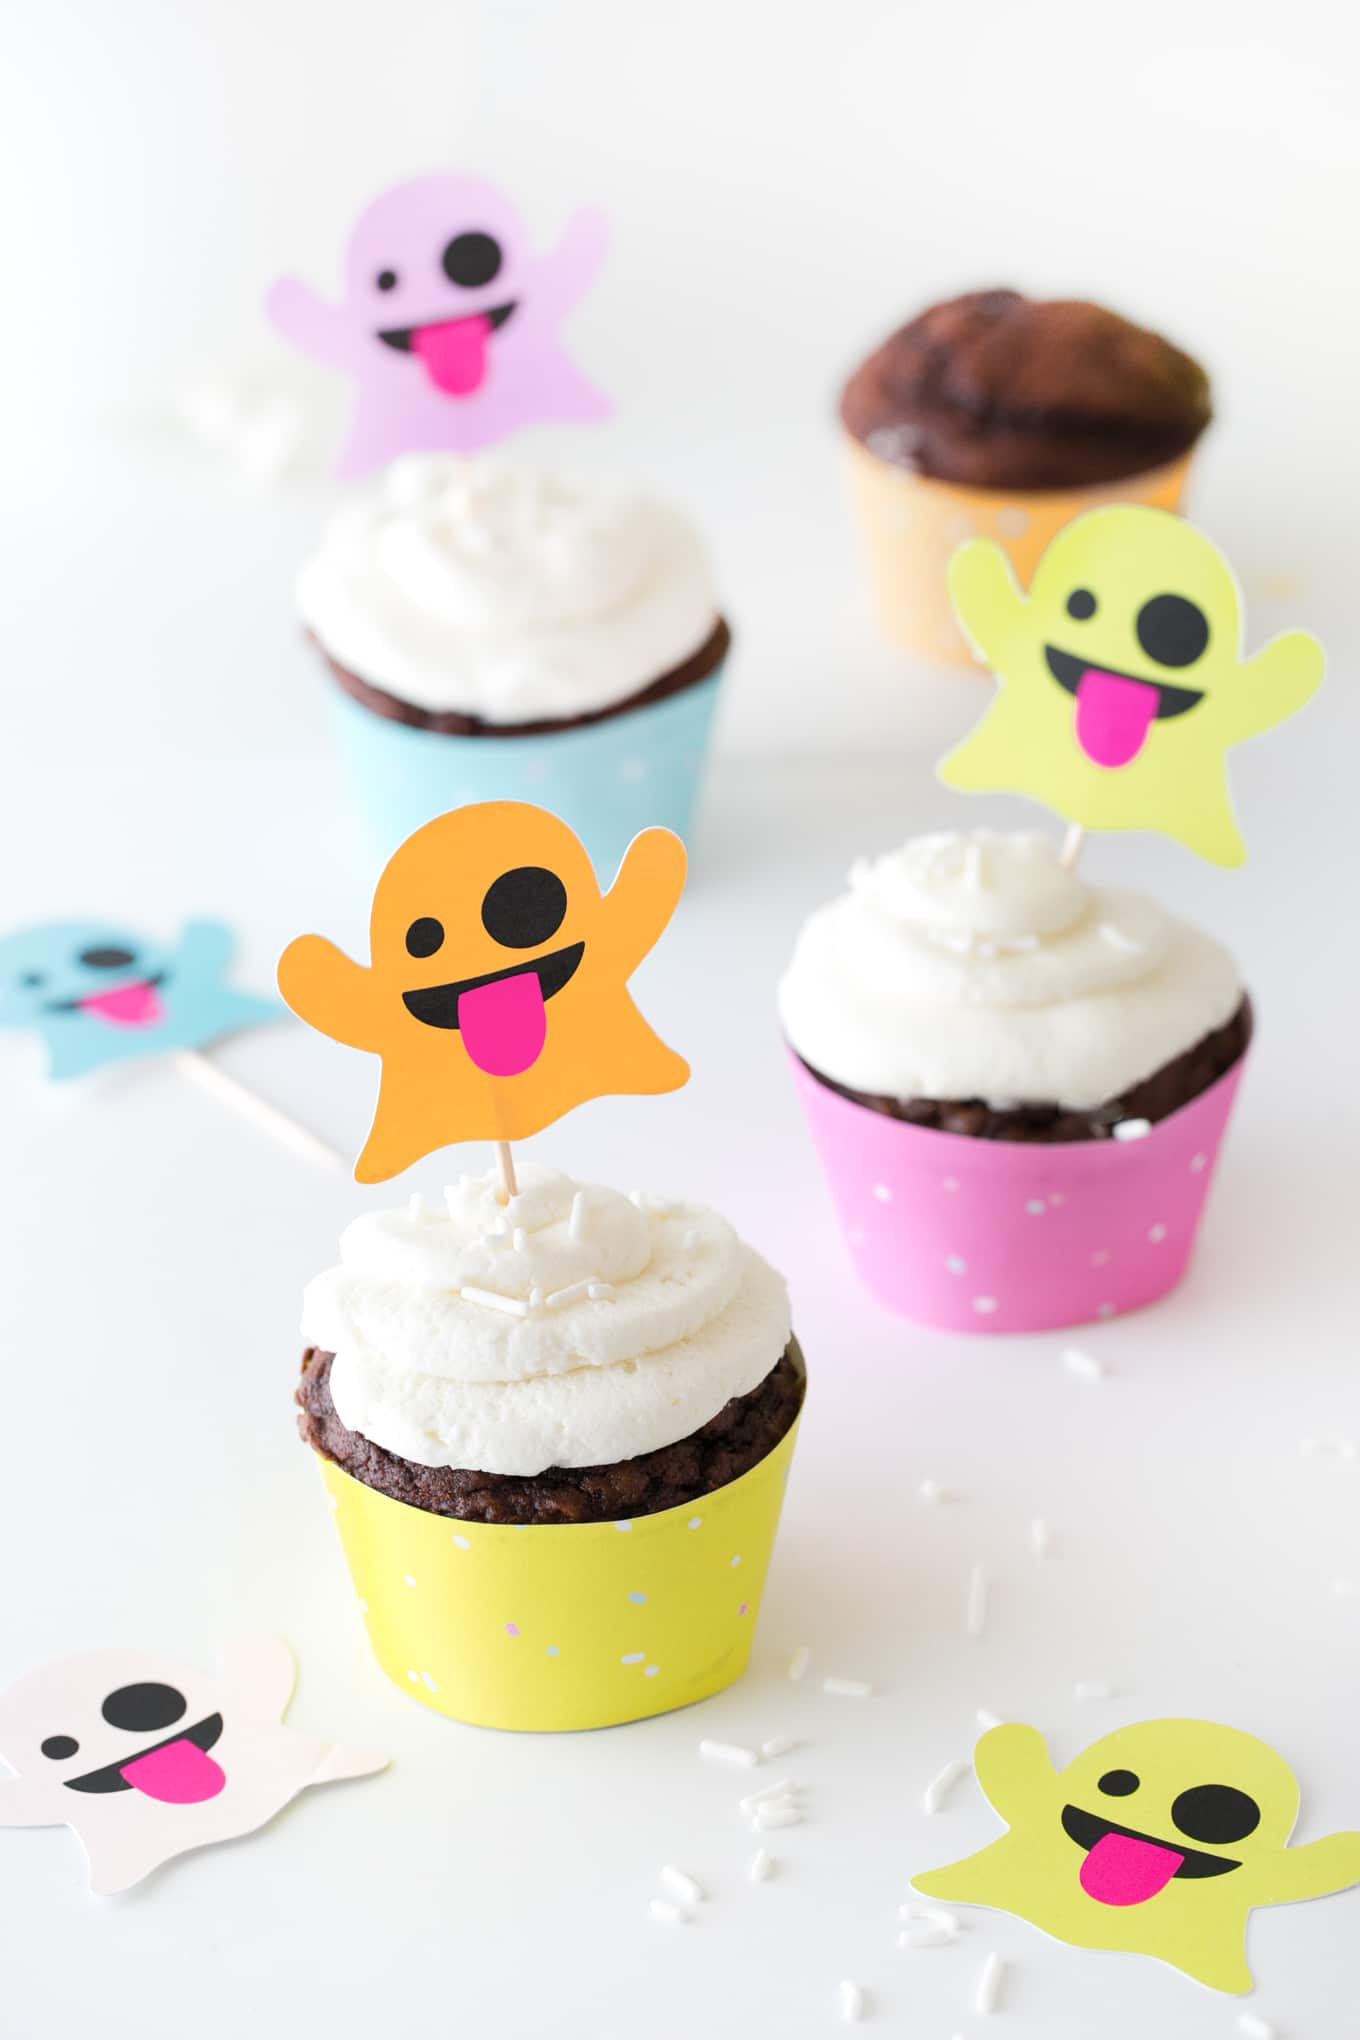 Emoji Ghost Halloween Cupcake Toppers! Free to download and print at www.DesignEatRepeat.com #Halloween #Printable #Cupcake #Emoji